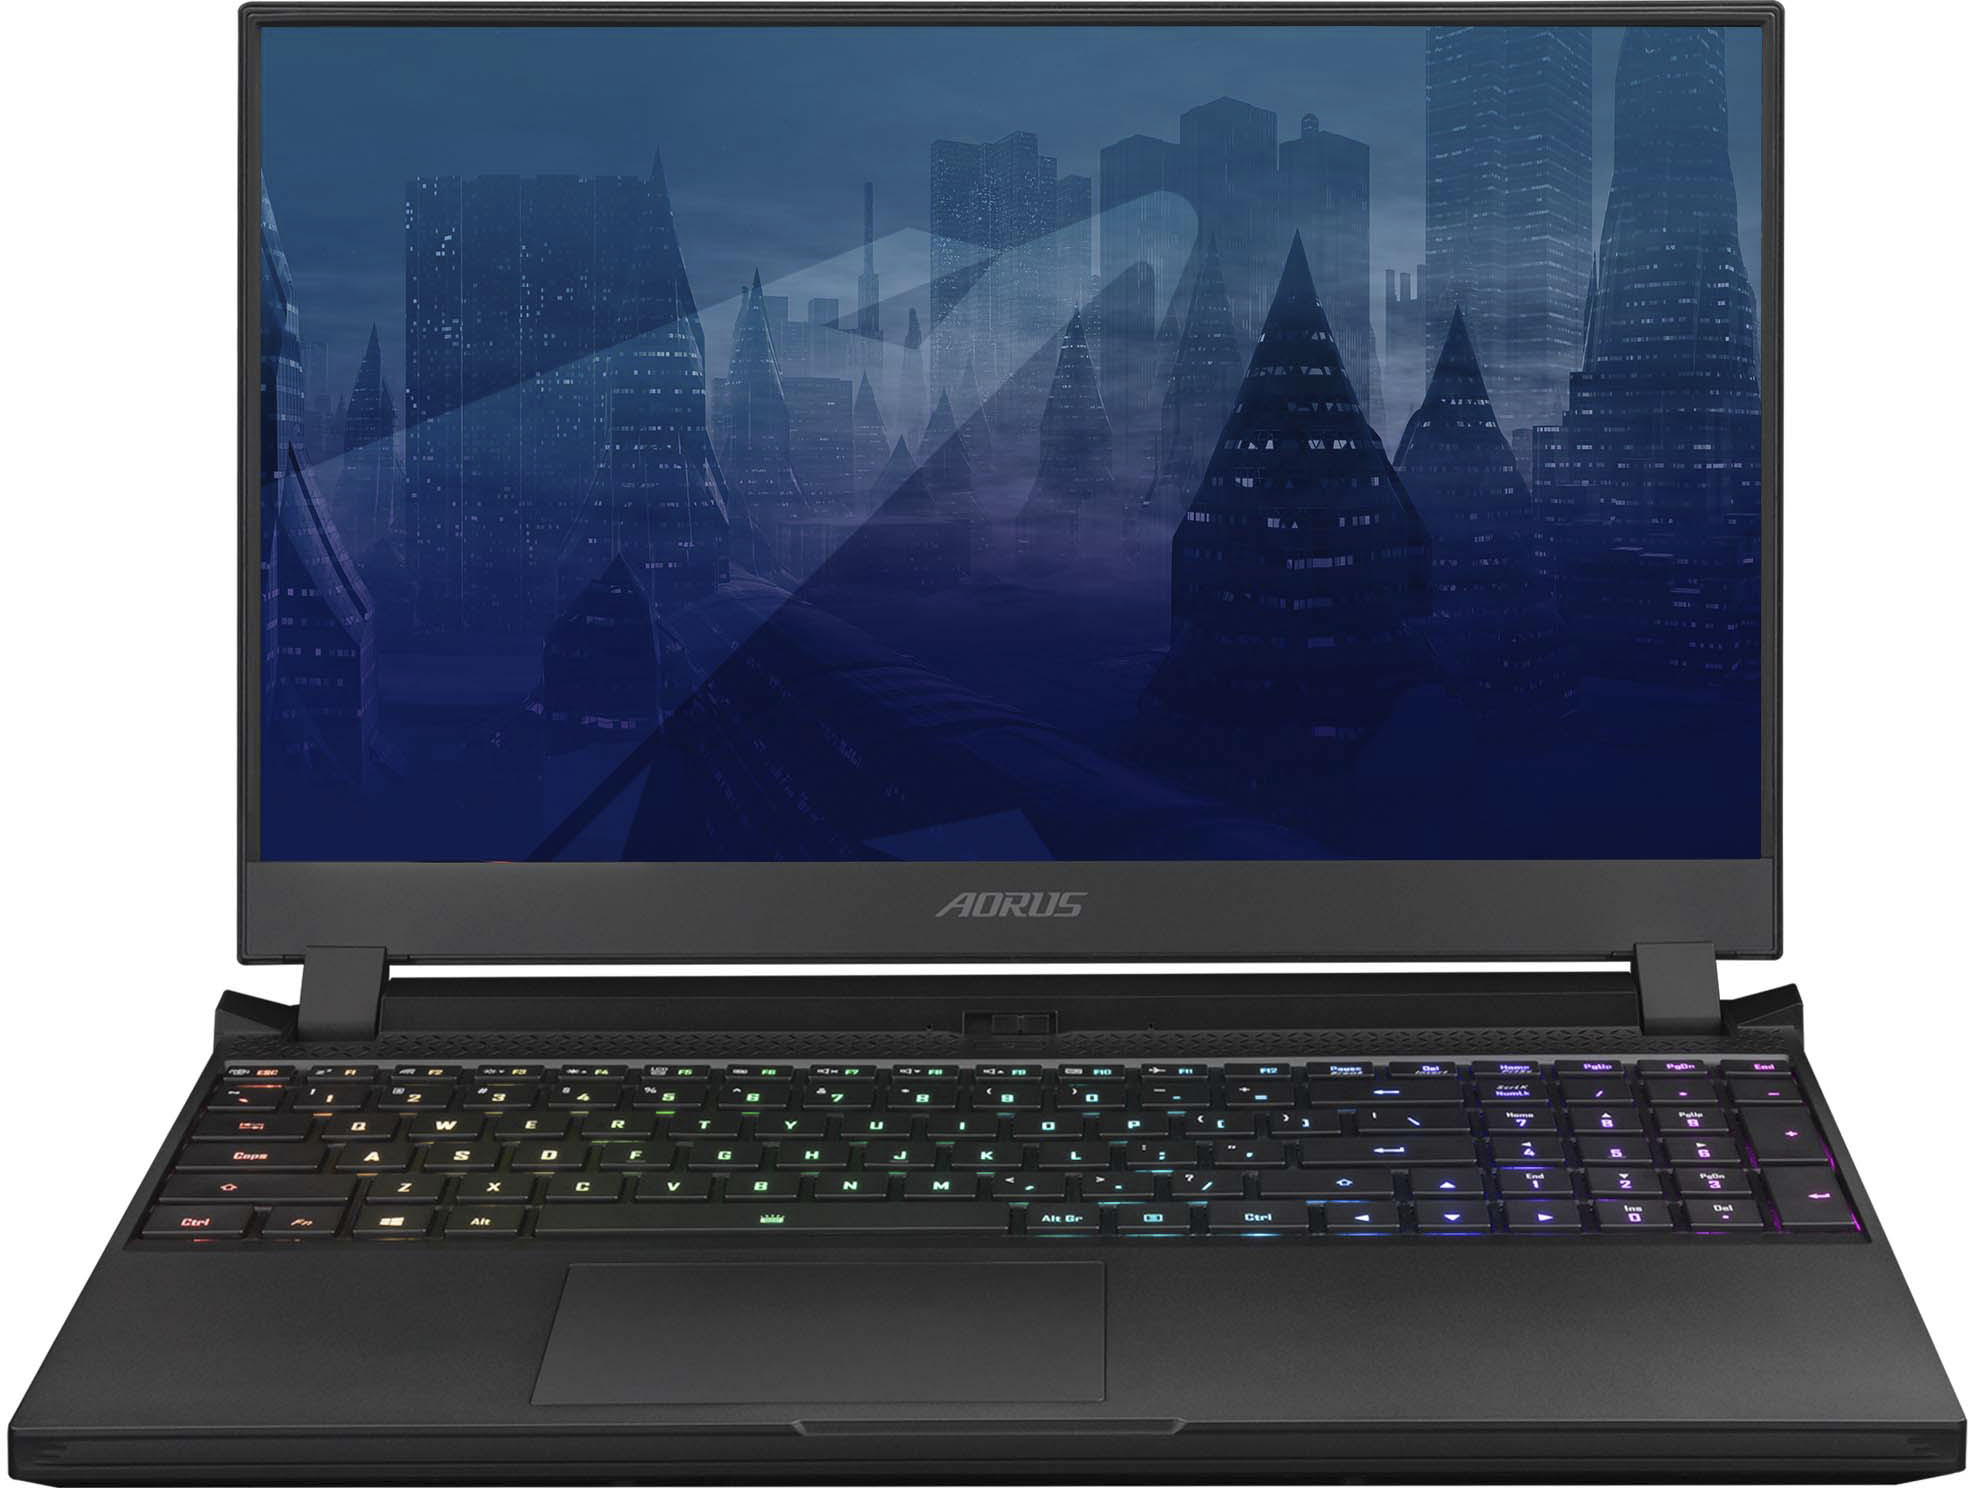 Open Box Excellent - GIGABYTE - AORUS 15.6 IPS 240Hz Gaming Laptop - Intel Core i7-11800H - 16GB Memory - NVIDIA GeForce RTX 3070 (115w/130w) - 1TB SSD - $1,095.99